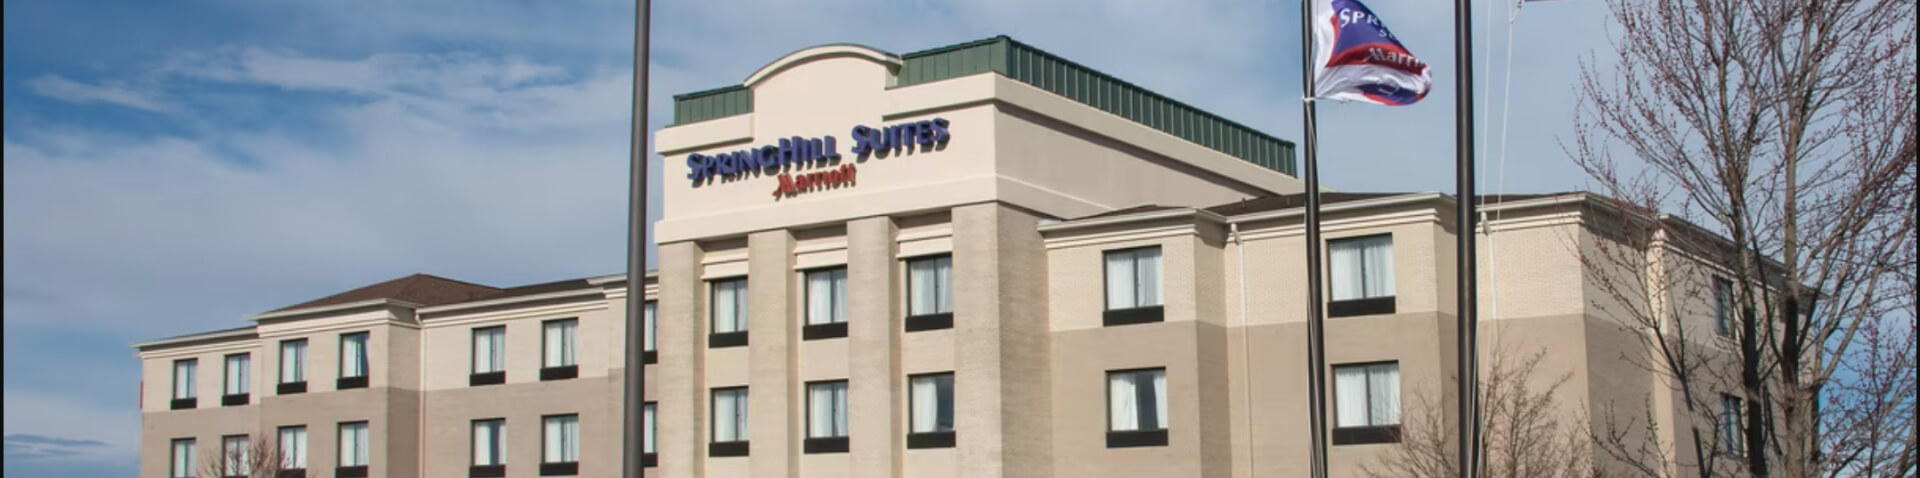 exterior of Springhill Suites